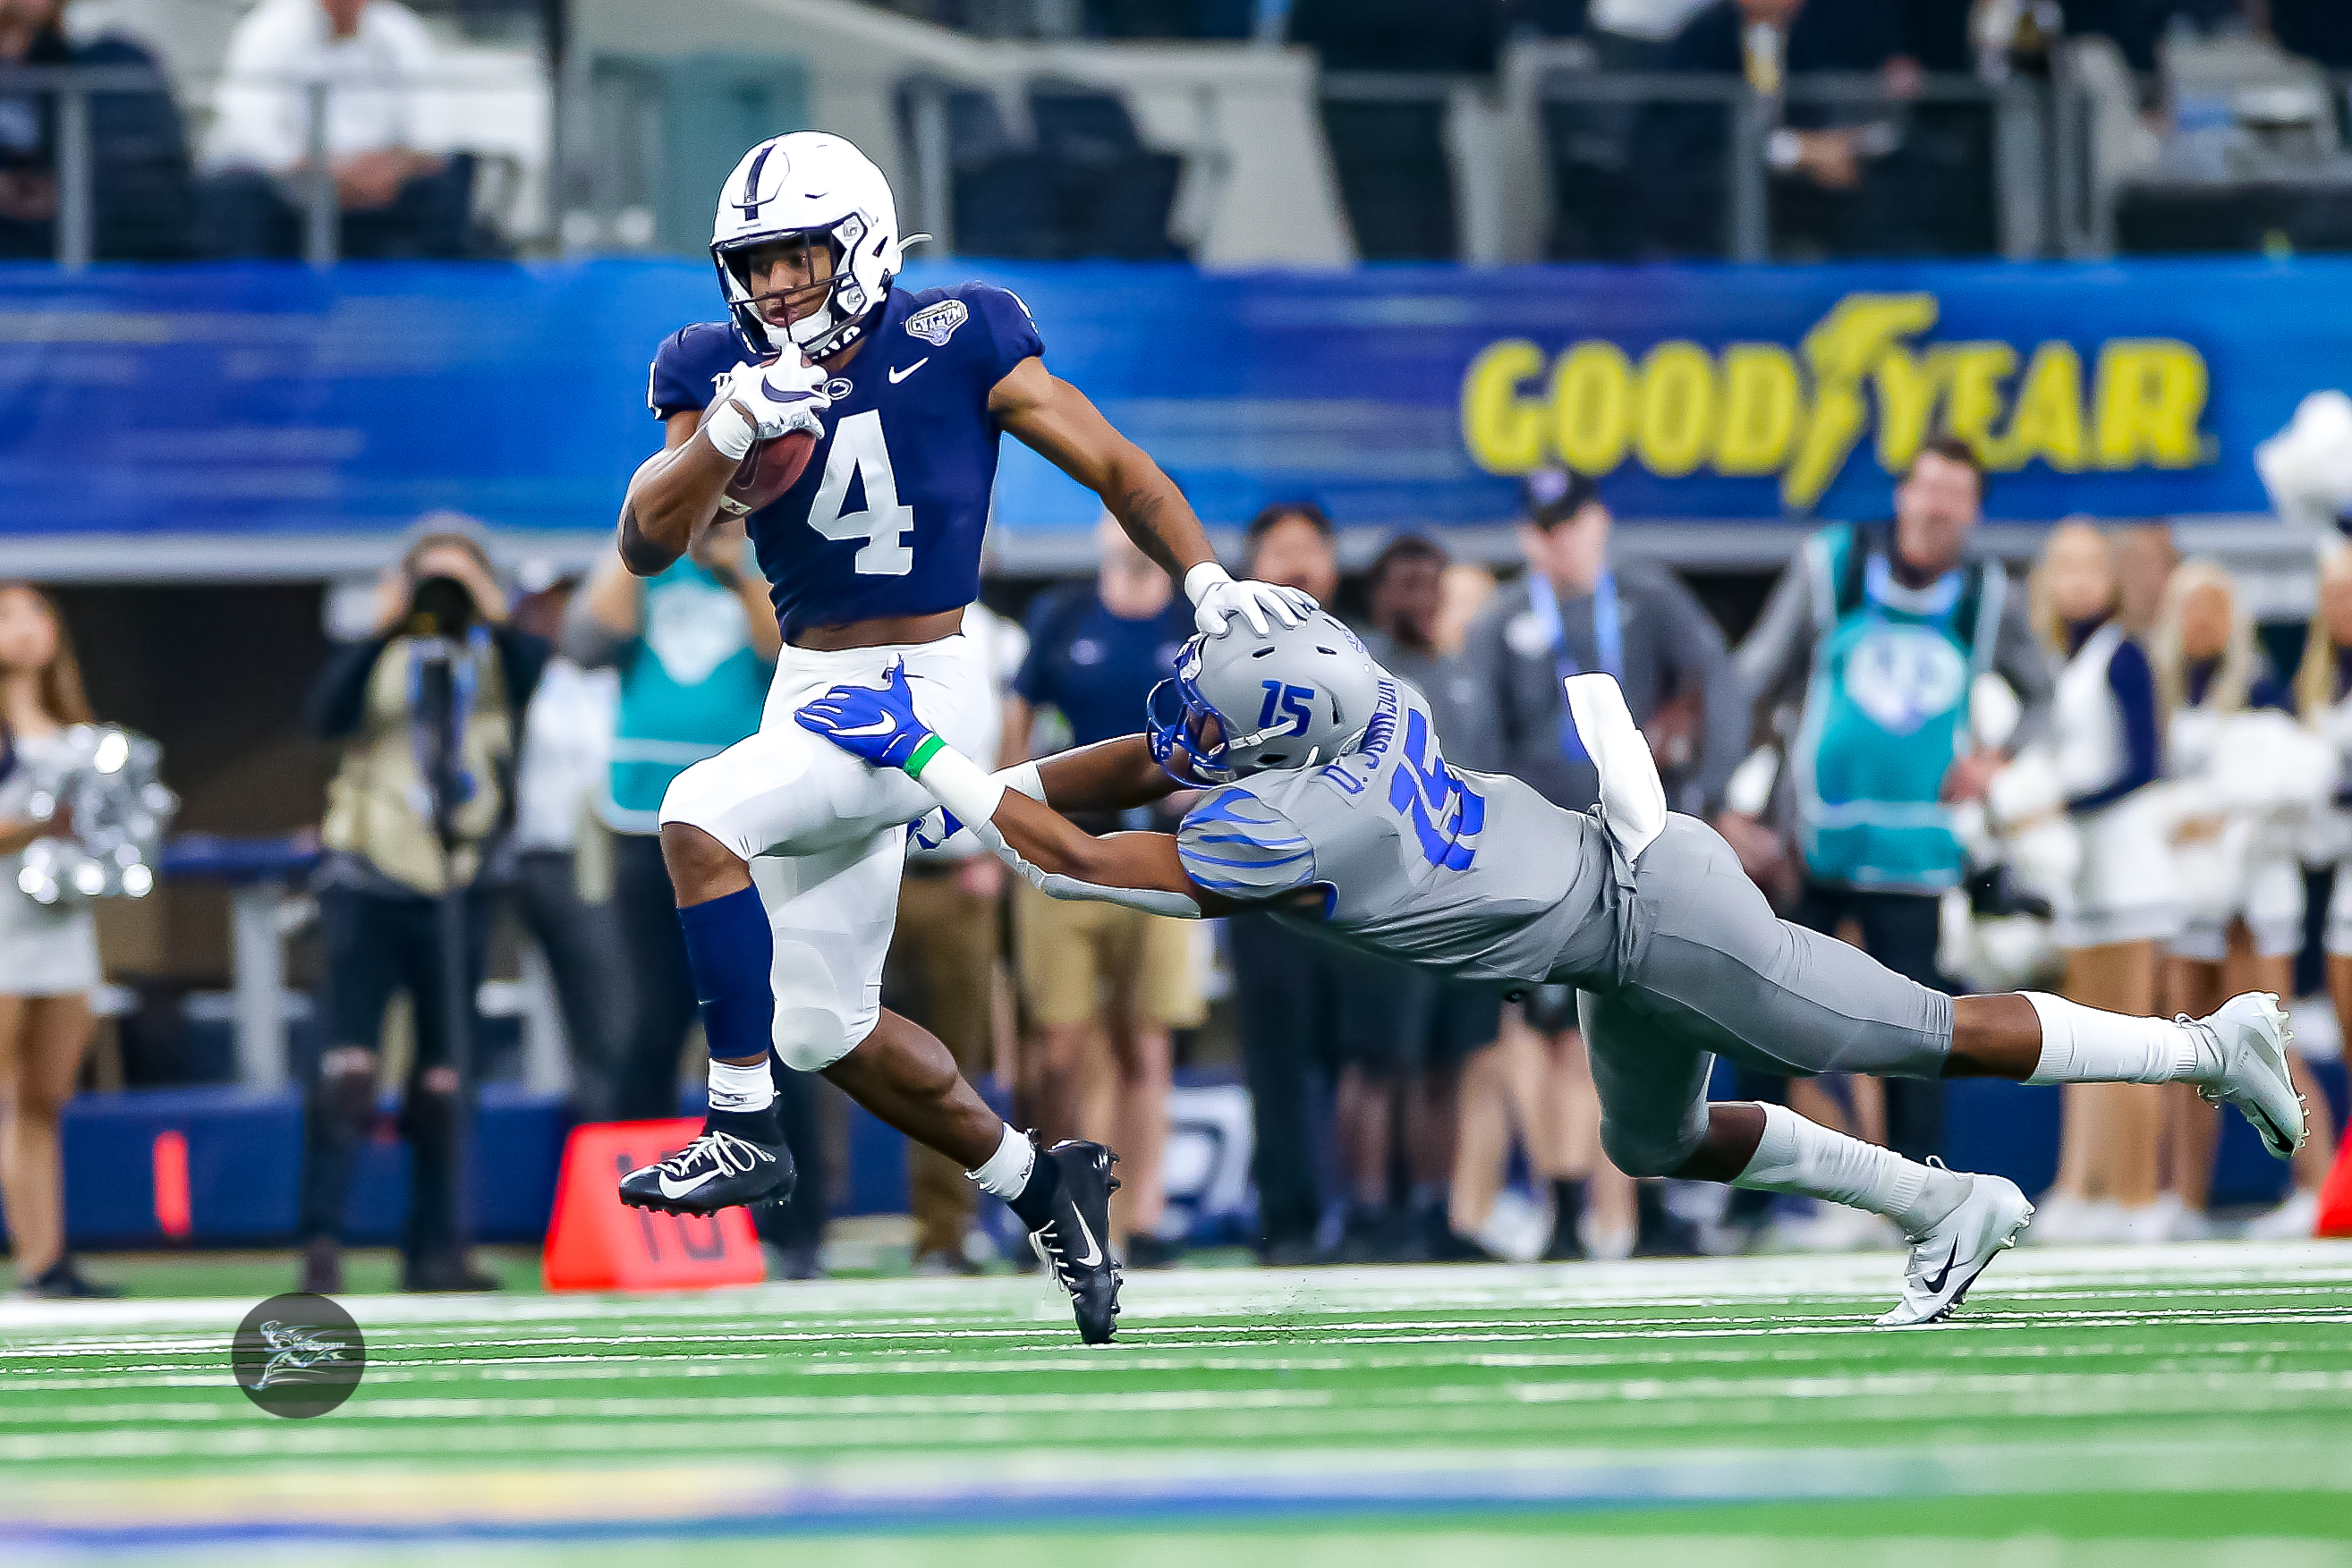 Penn State Wins Cotton Bowl In Win Over Memphis D210SPORTS